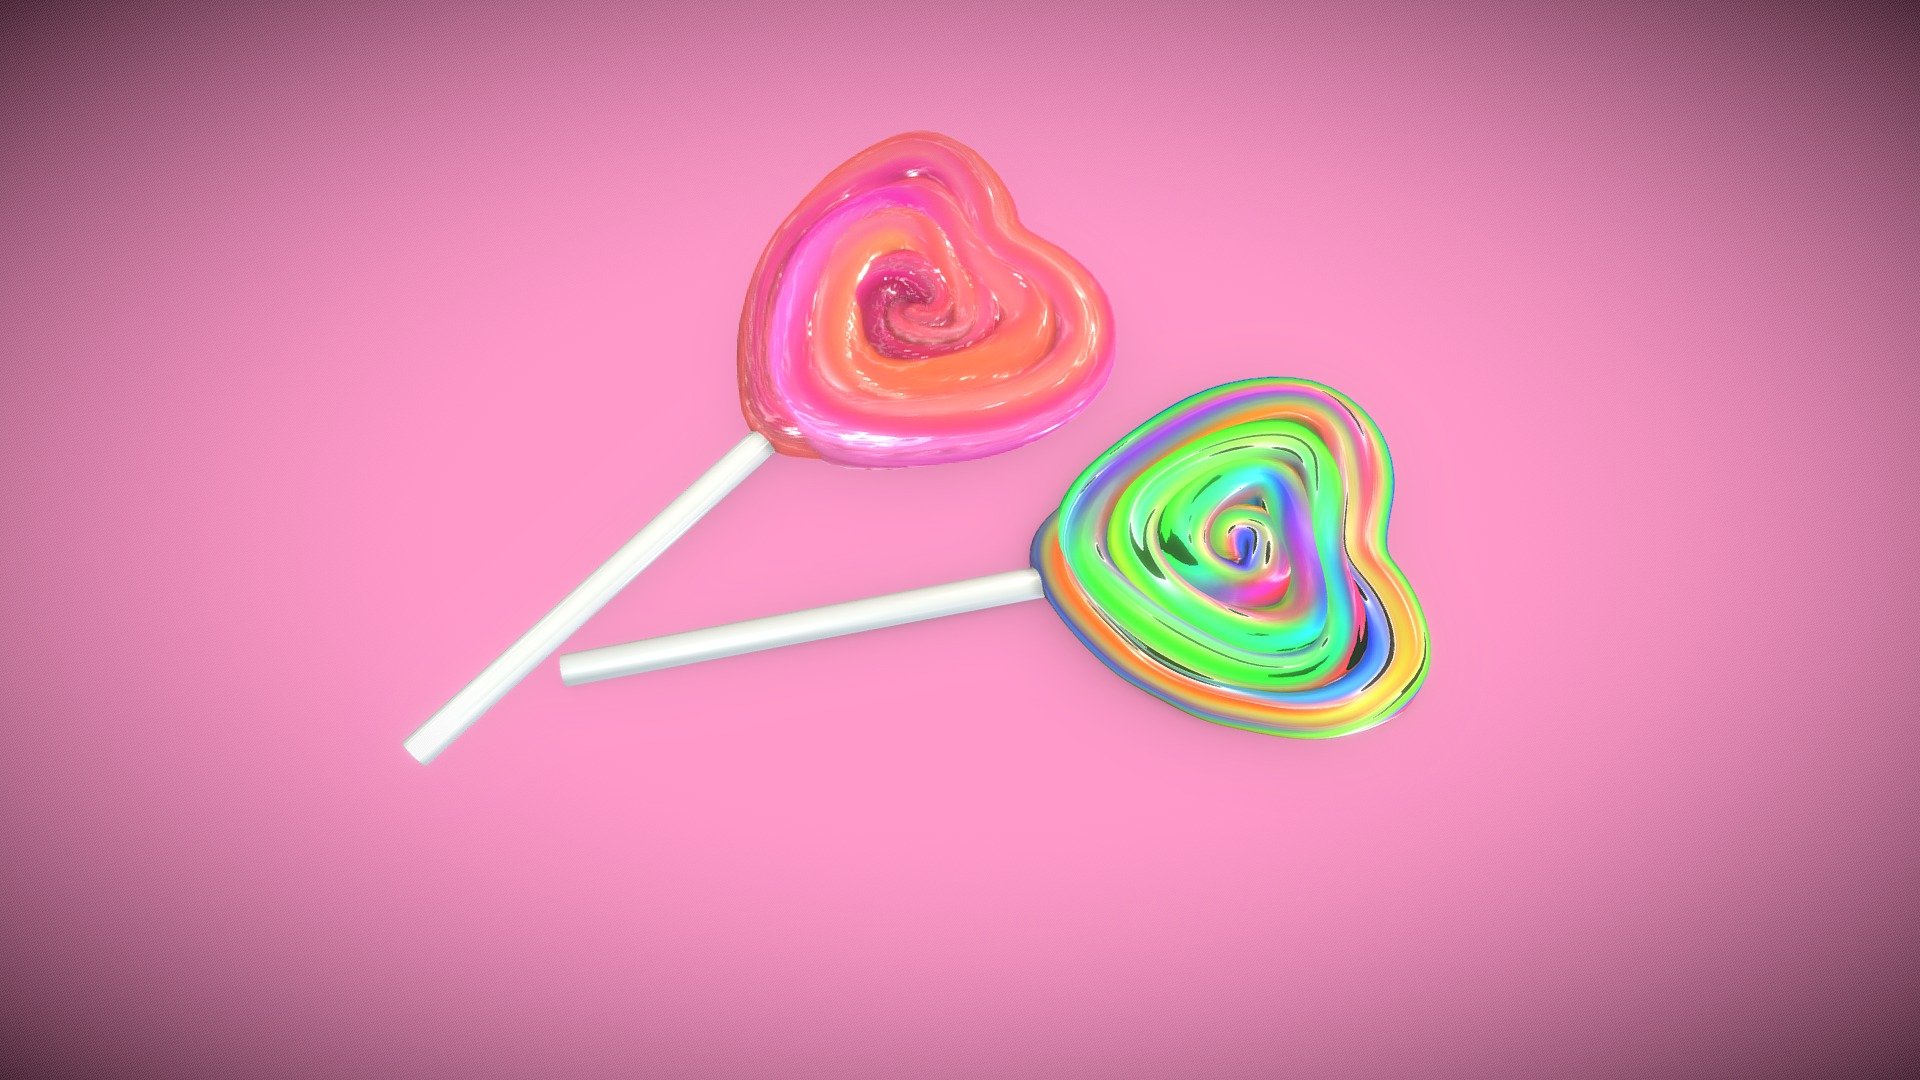 Candy - 10th Day challenge, #3December2020

Modeled in Blender.

Material edited in Sketchfab.

Feel free to ask for format conversion or any other request 3d model